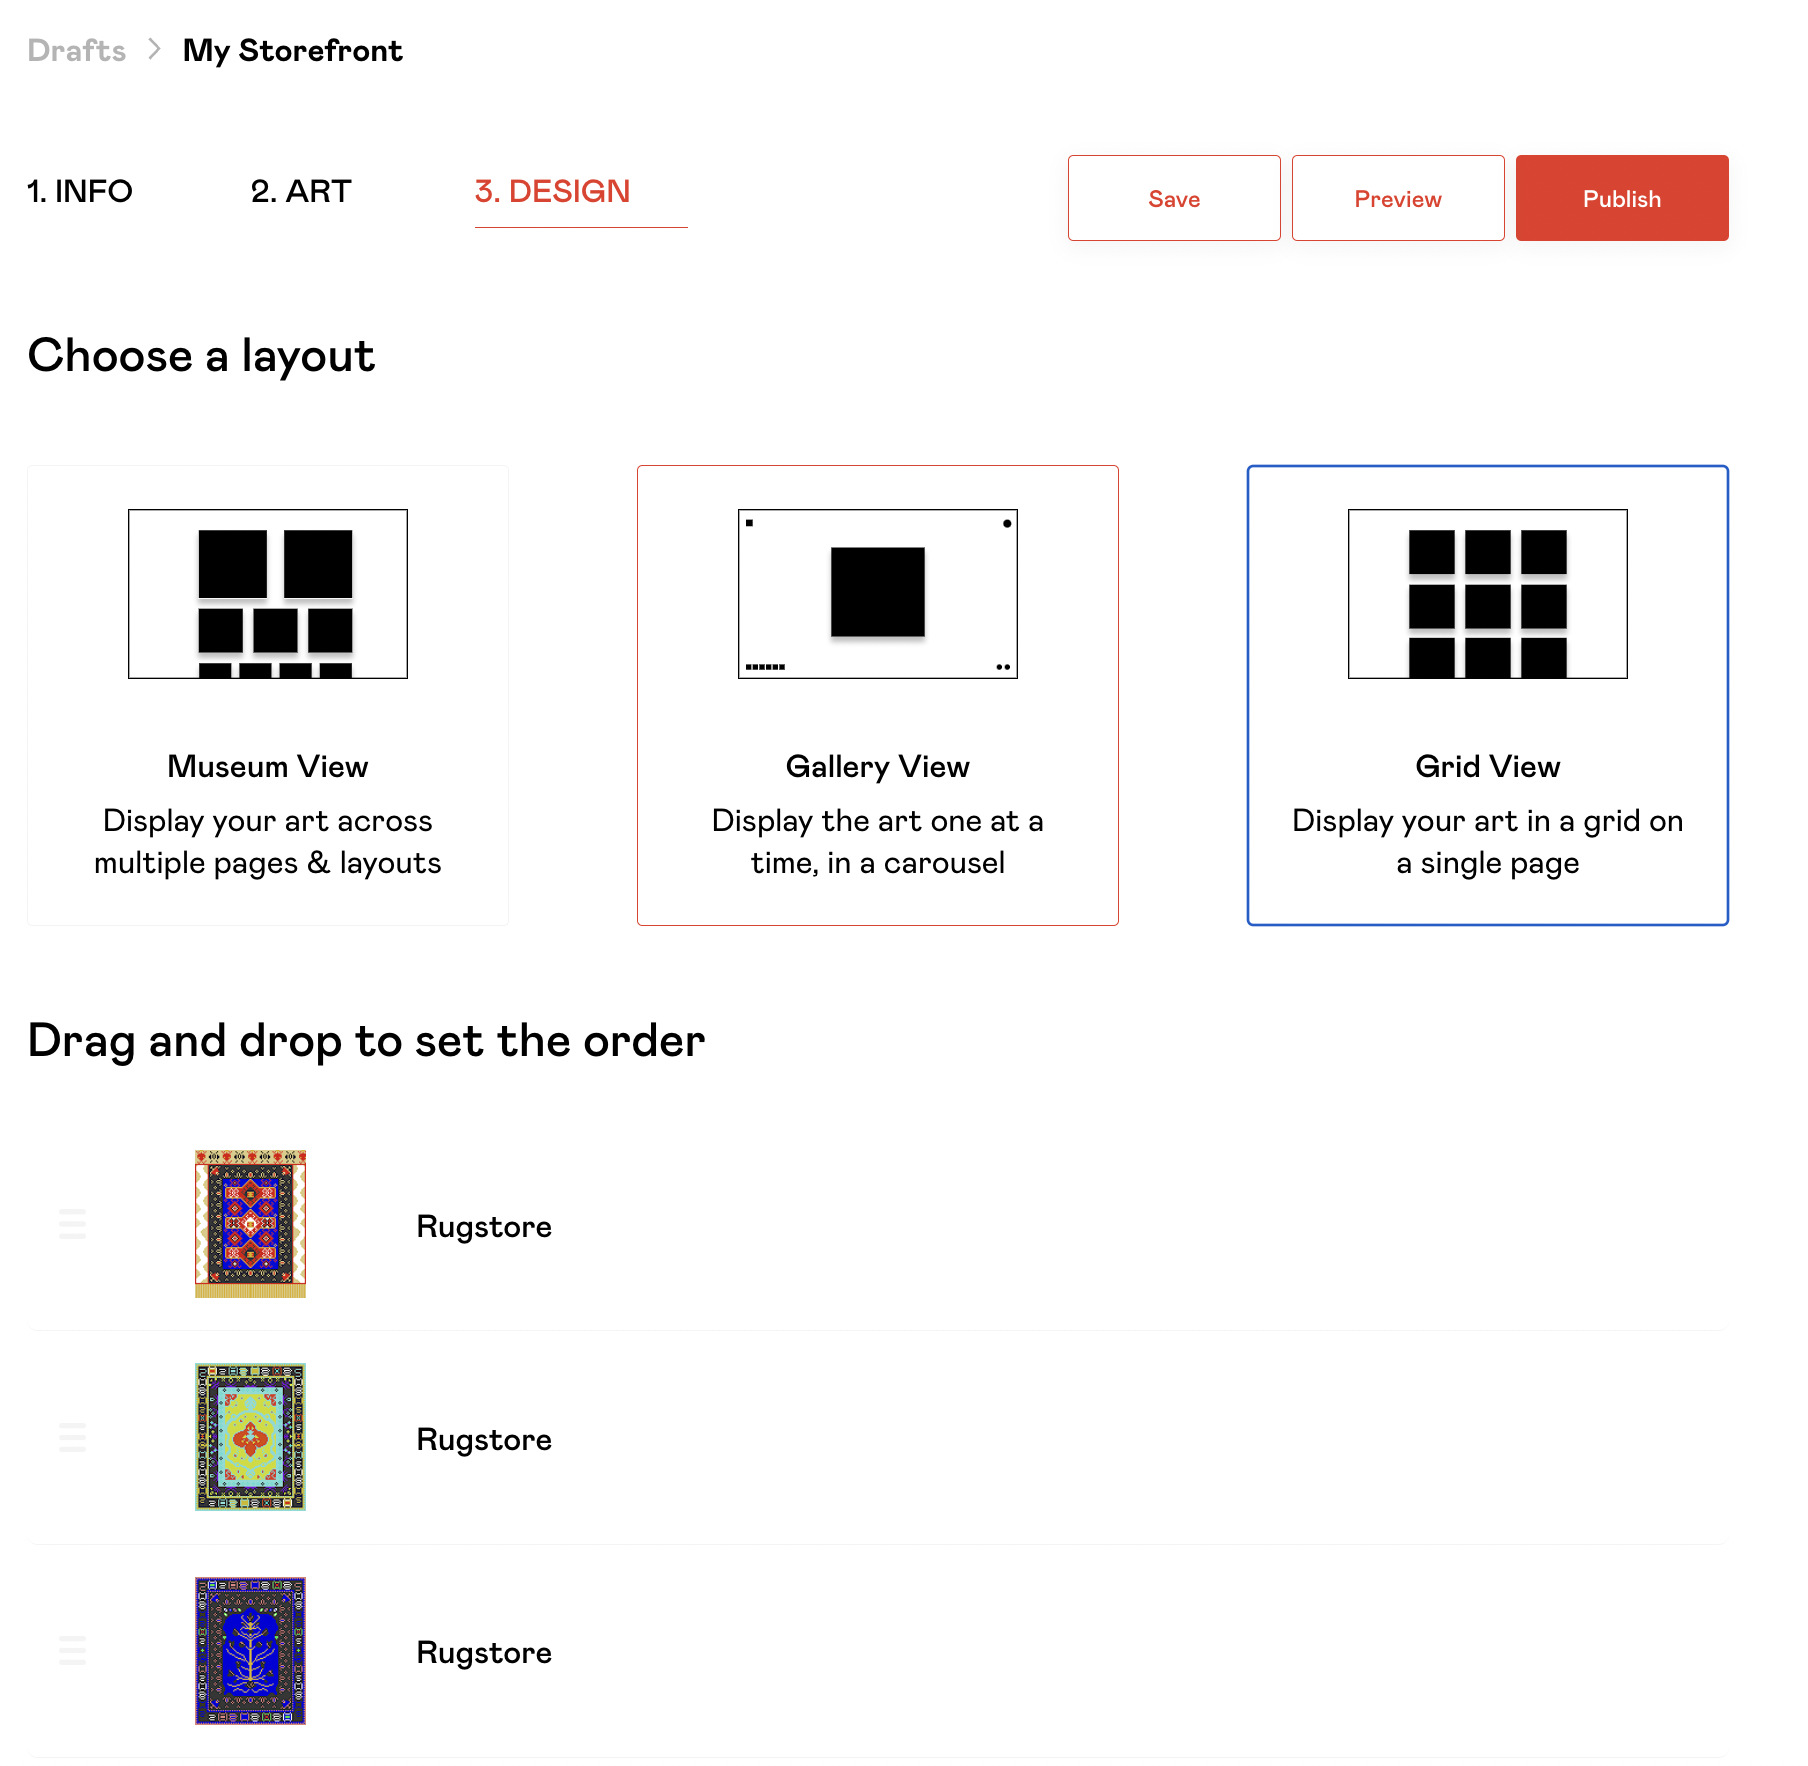 select your layout - museum and grid are recommended! 